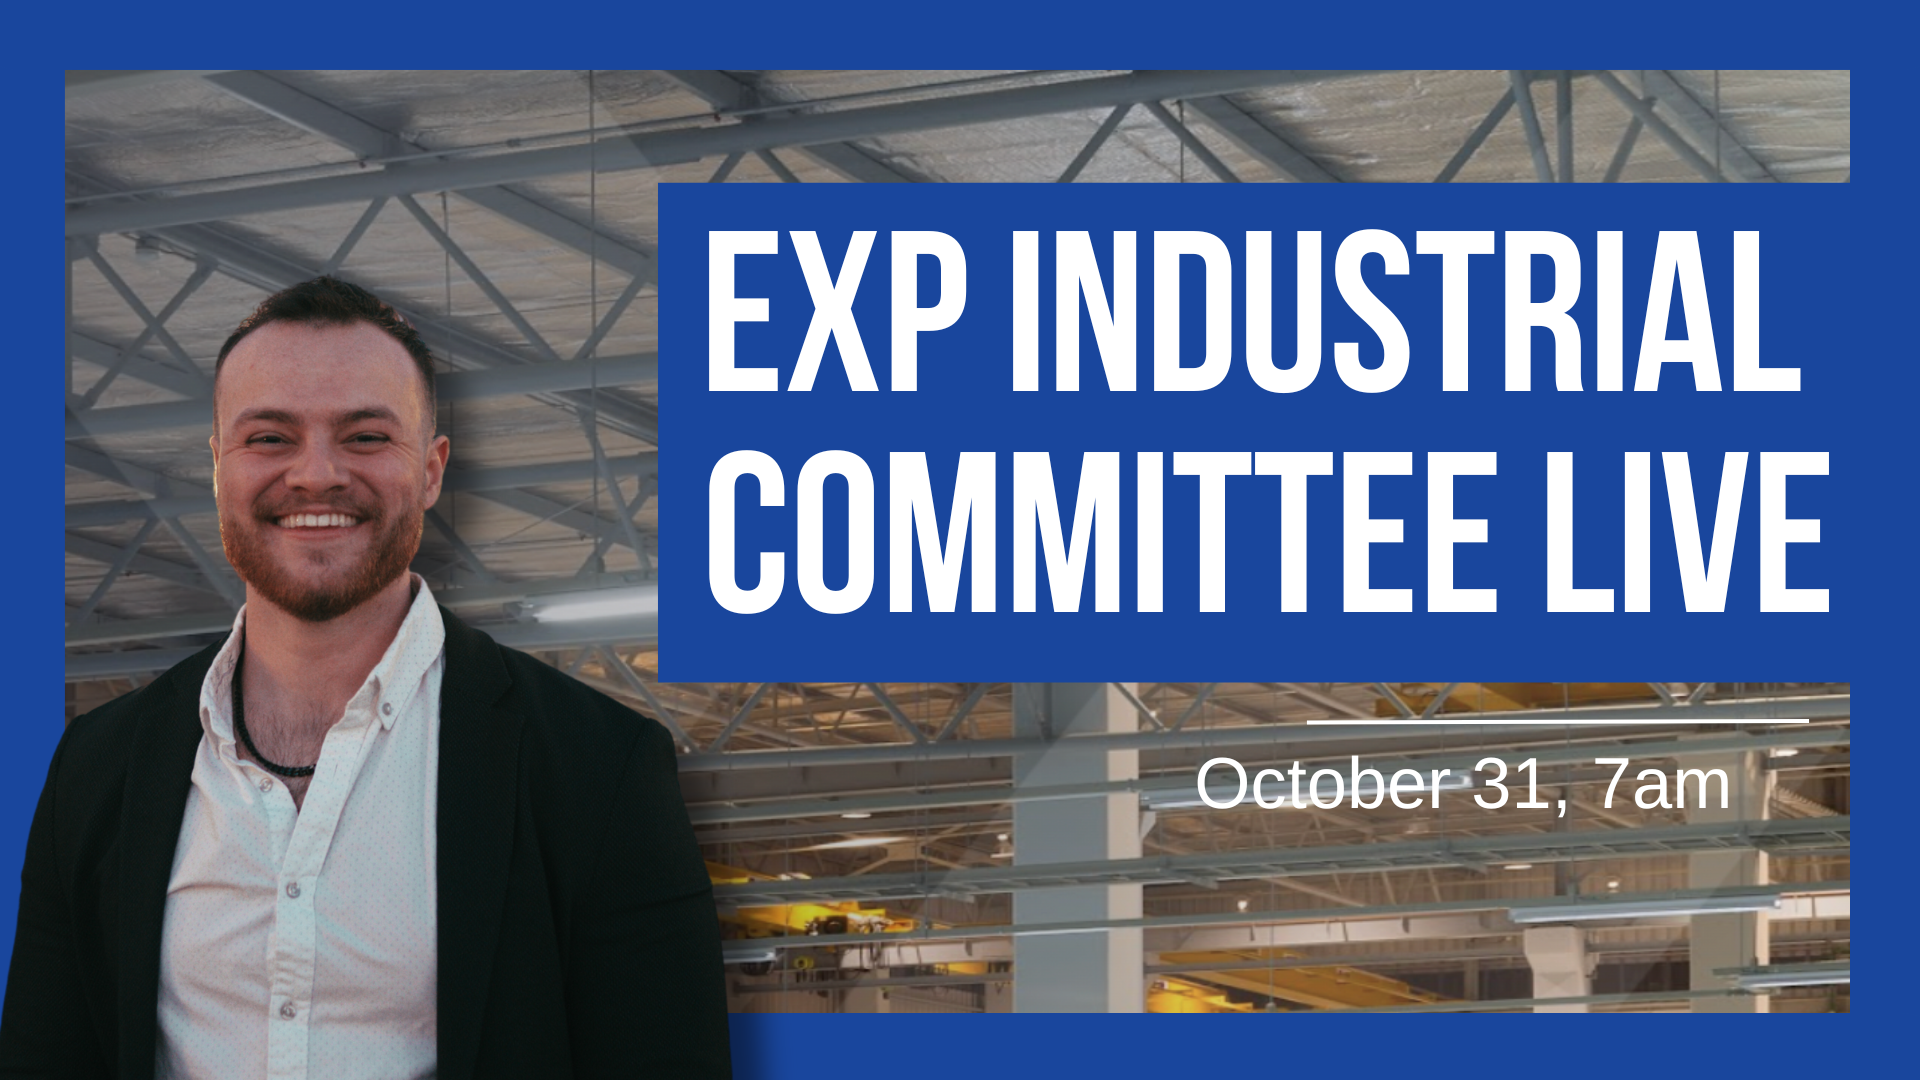 eXp Industrial Committee Live